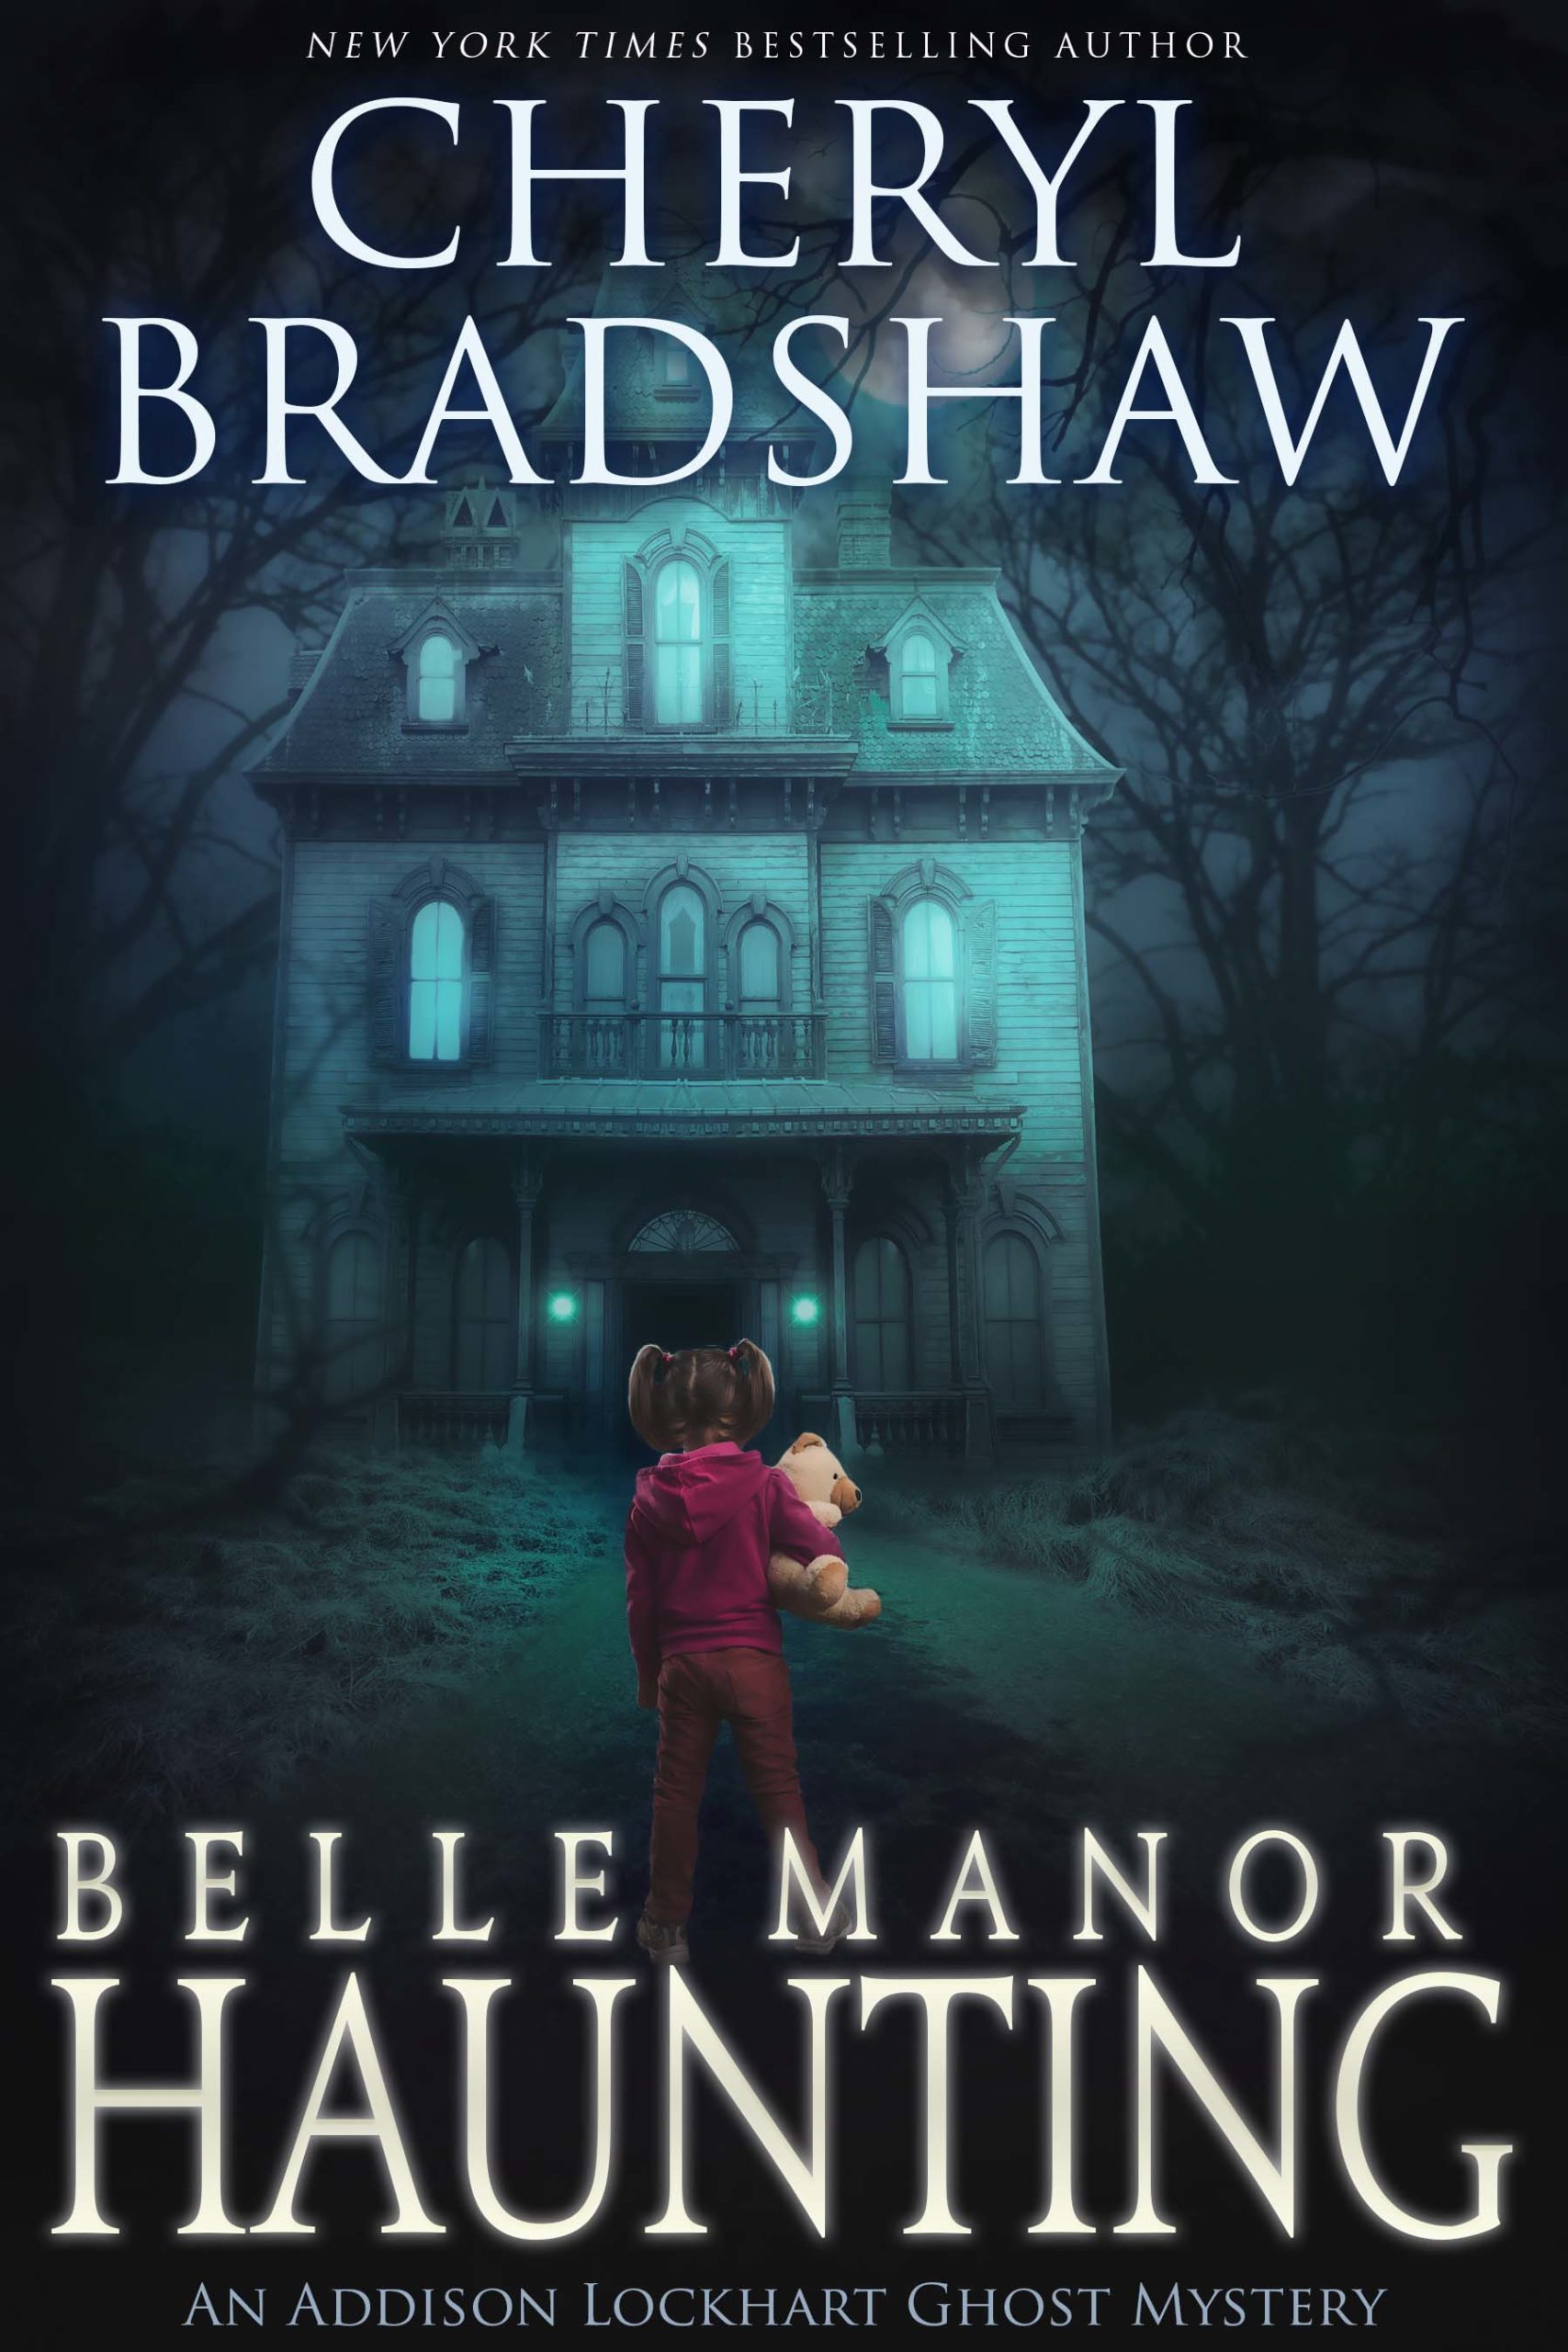 First Chapter of Belle Manor Haunting